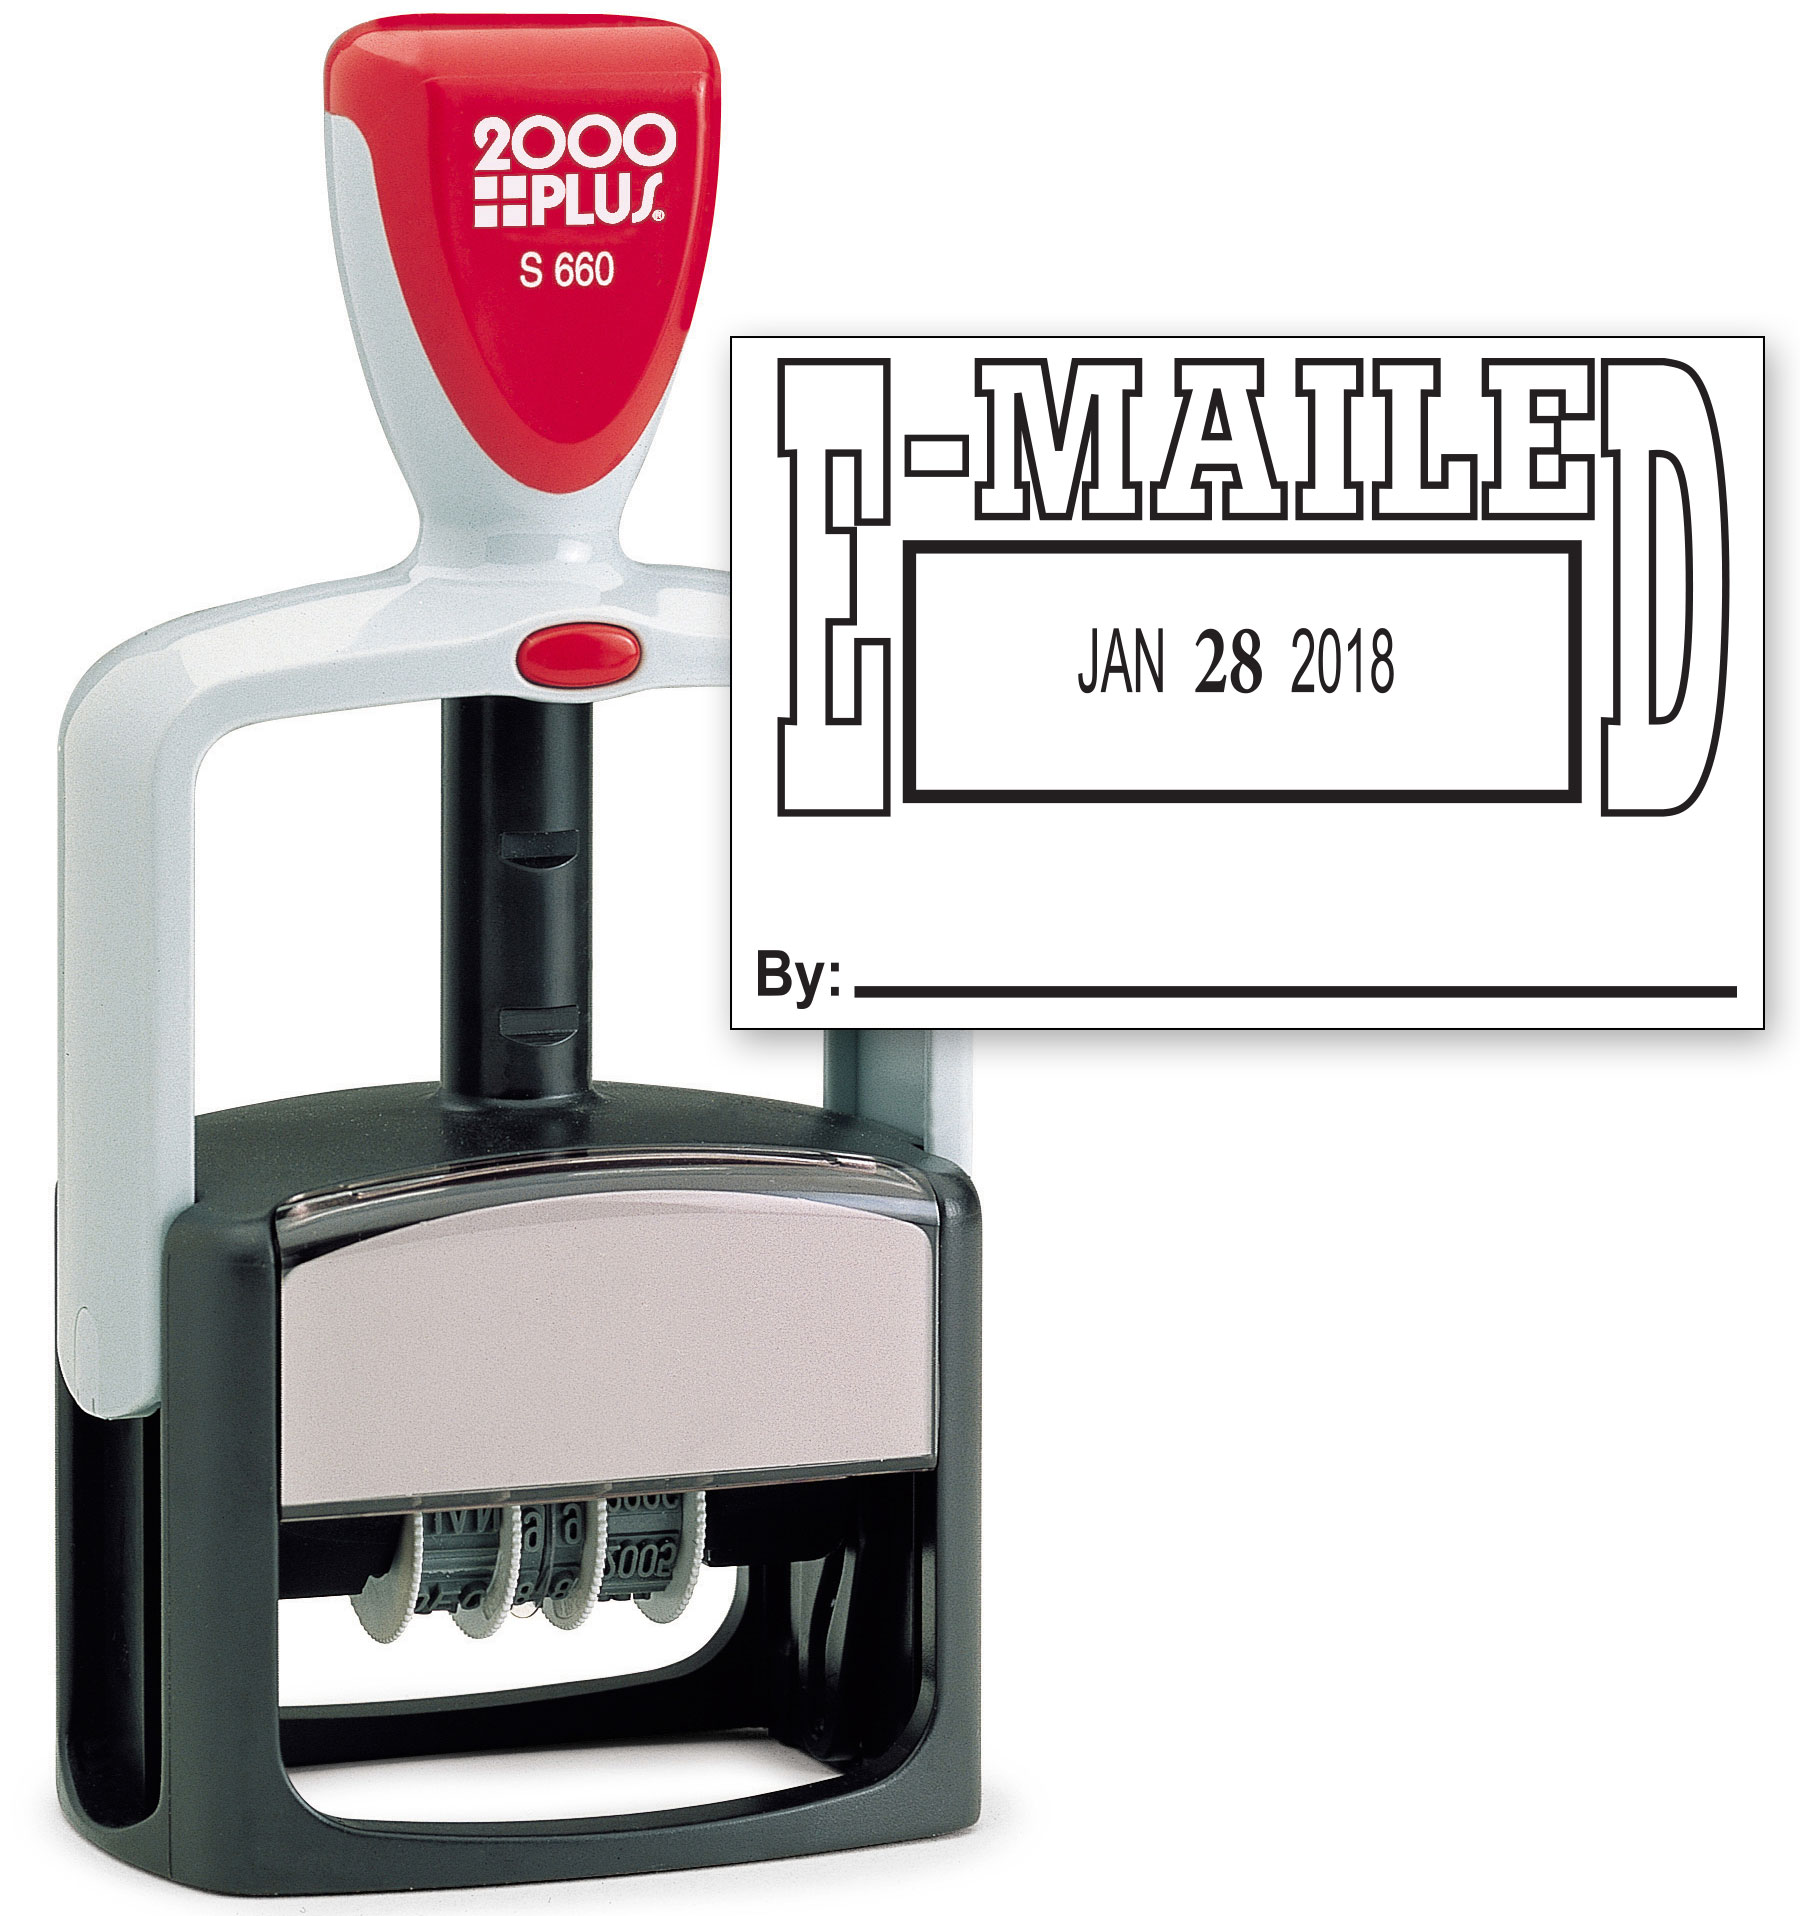 2000 PLUS Heavy Duty Style 2-Color Date Stamp with EMAILED self inking stamp - Black Ink